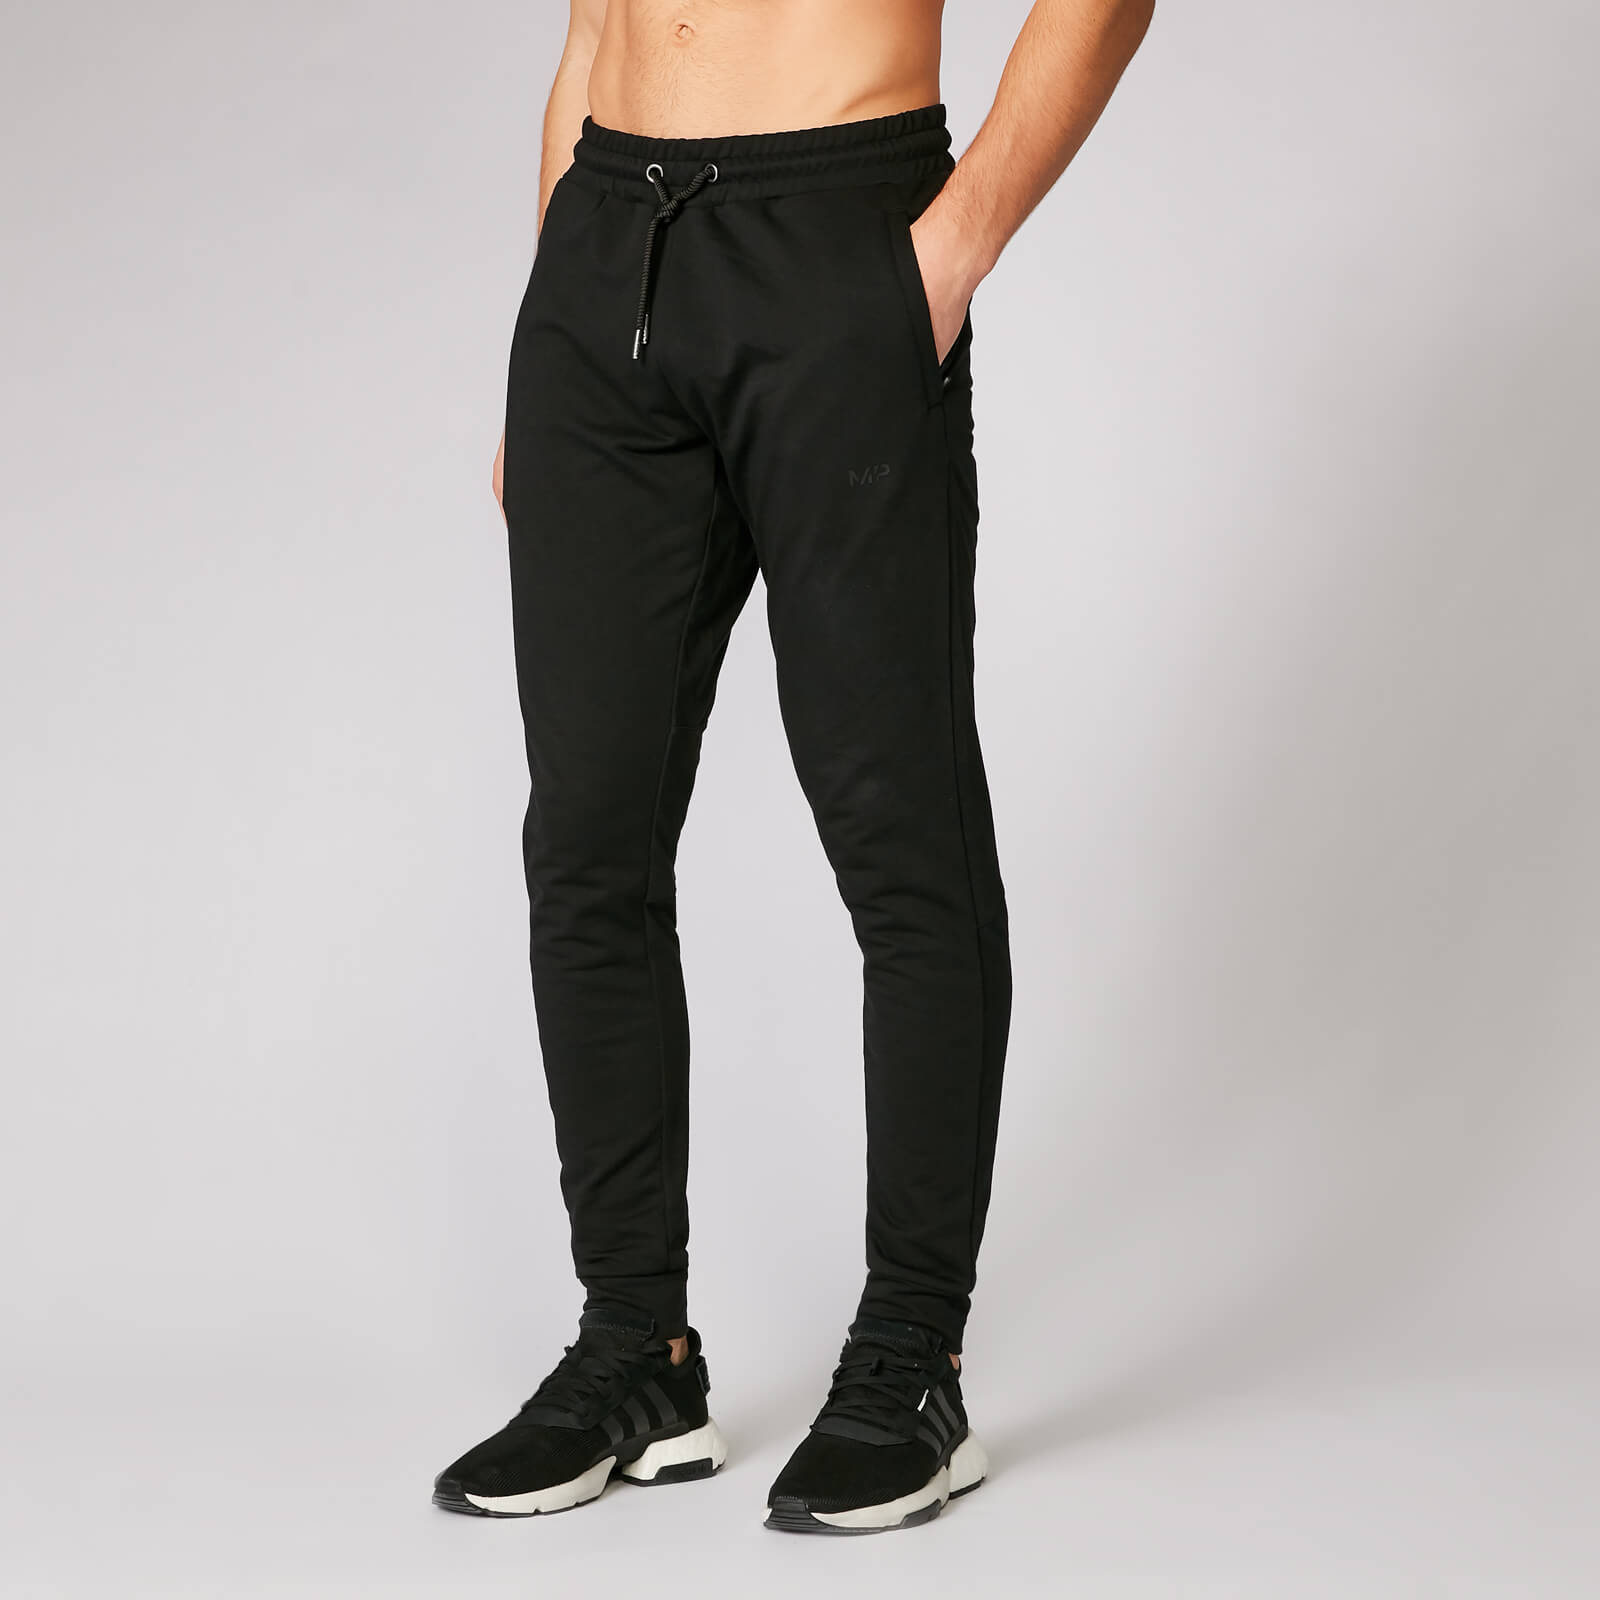 Myprotein Form Joggers - Black